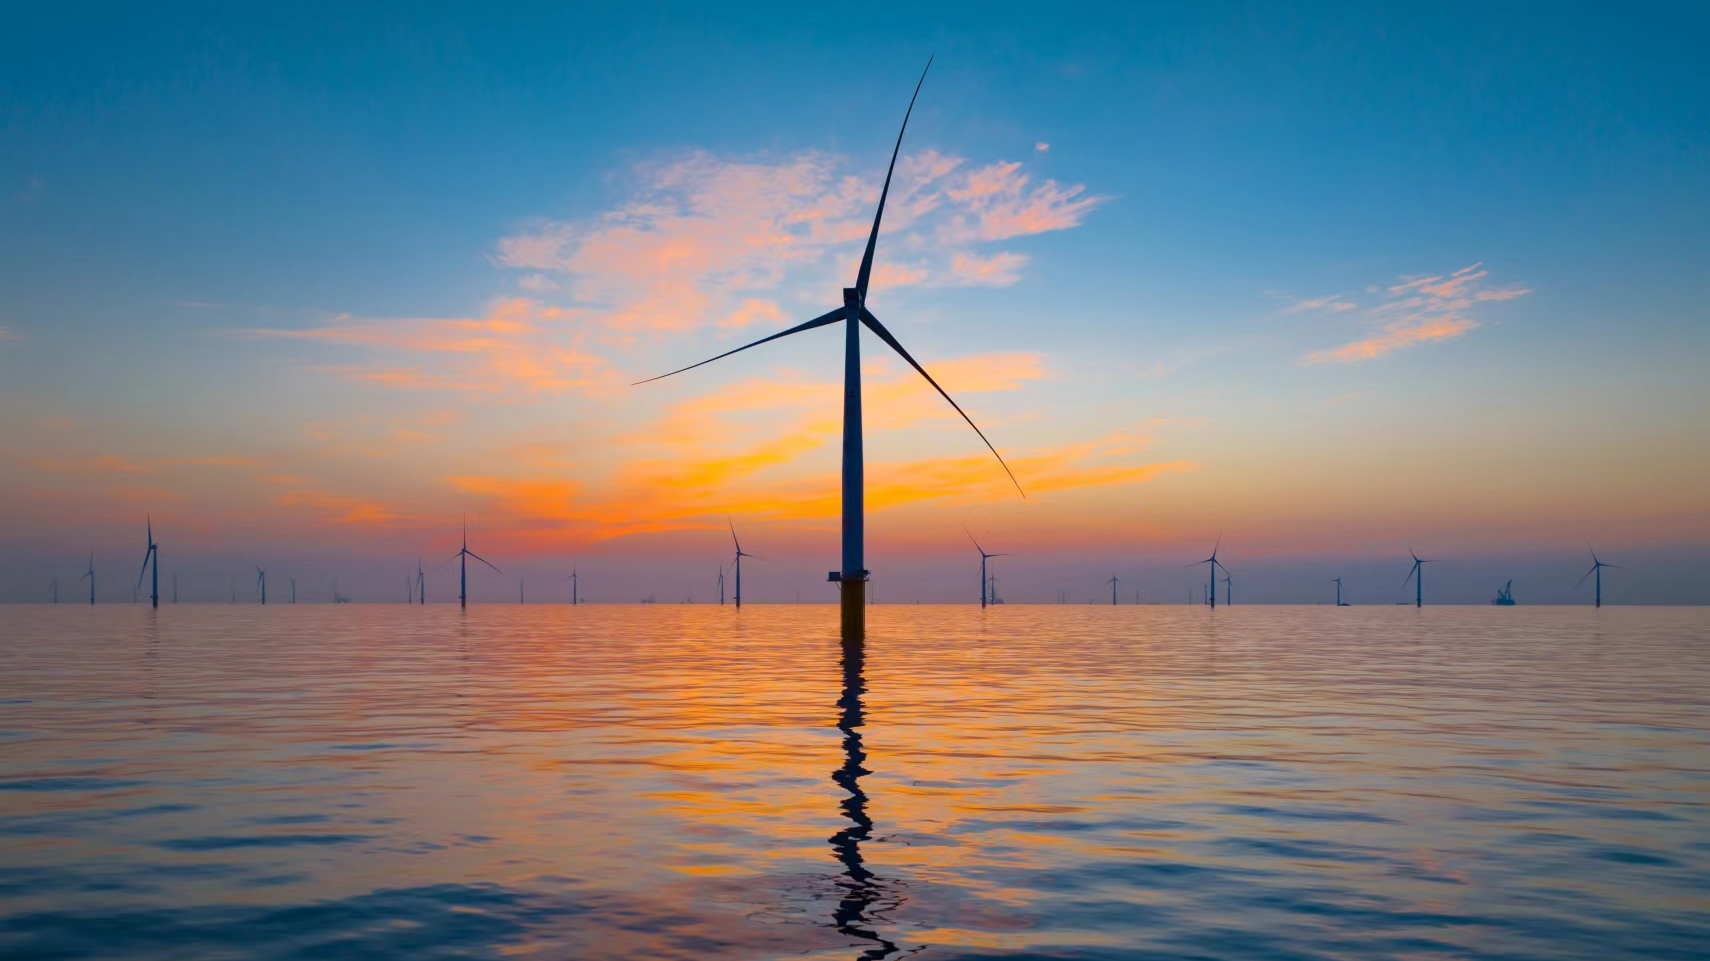 China's largest offshore wind power project achieving grid parity begins operation in Shanwei City, south China's Guangdong Province, December 20, 2022. /CGN